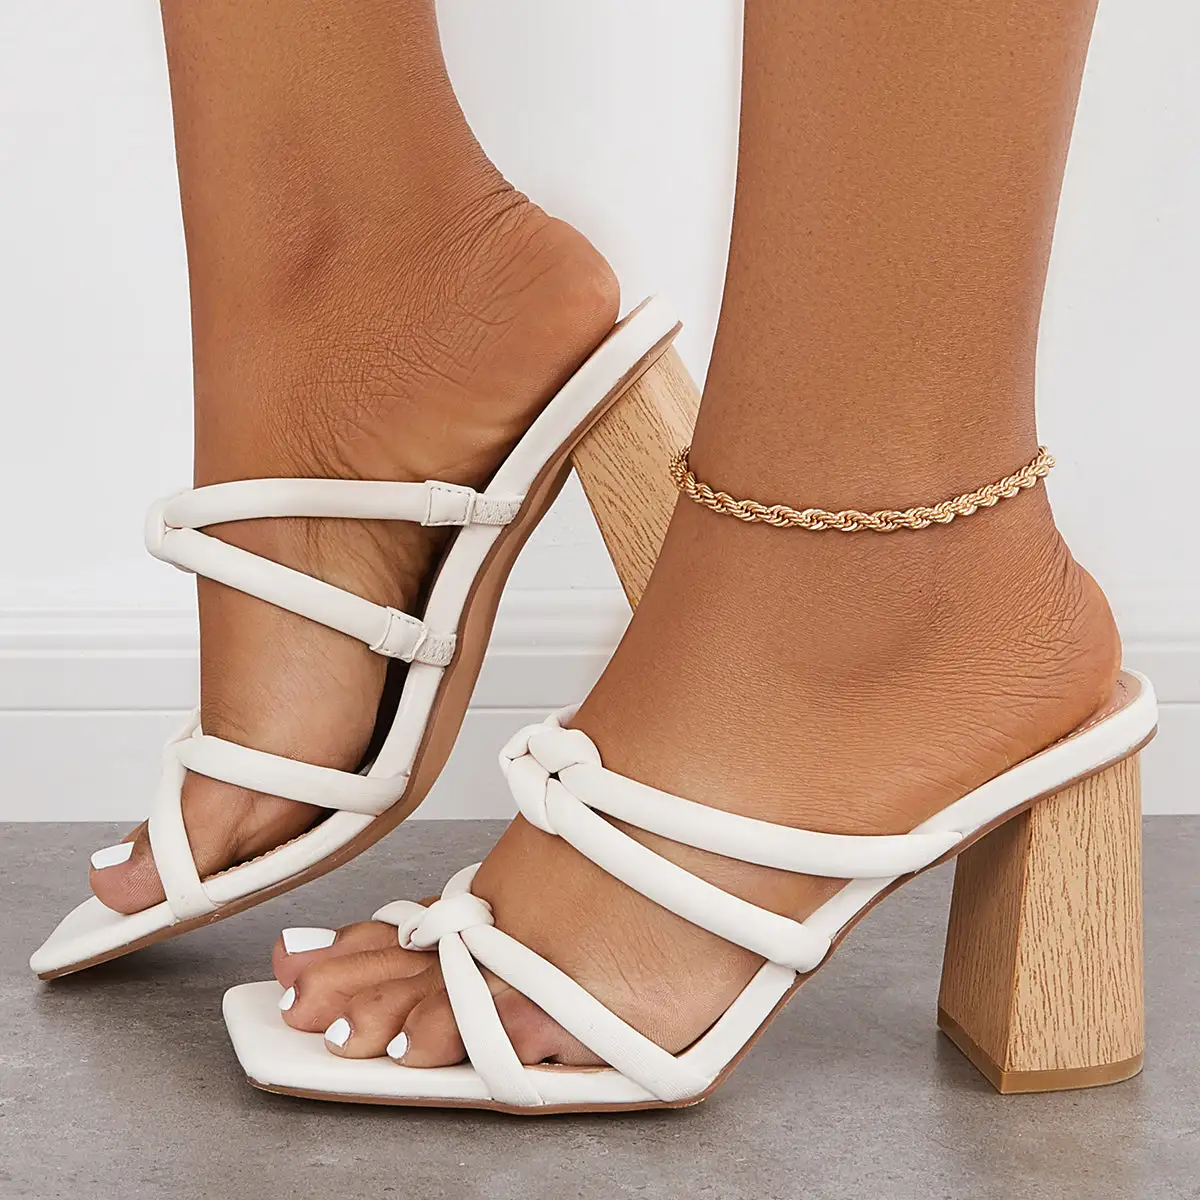 Square Toe Chunky High Heeled Mules Slip on Backless Sandals